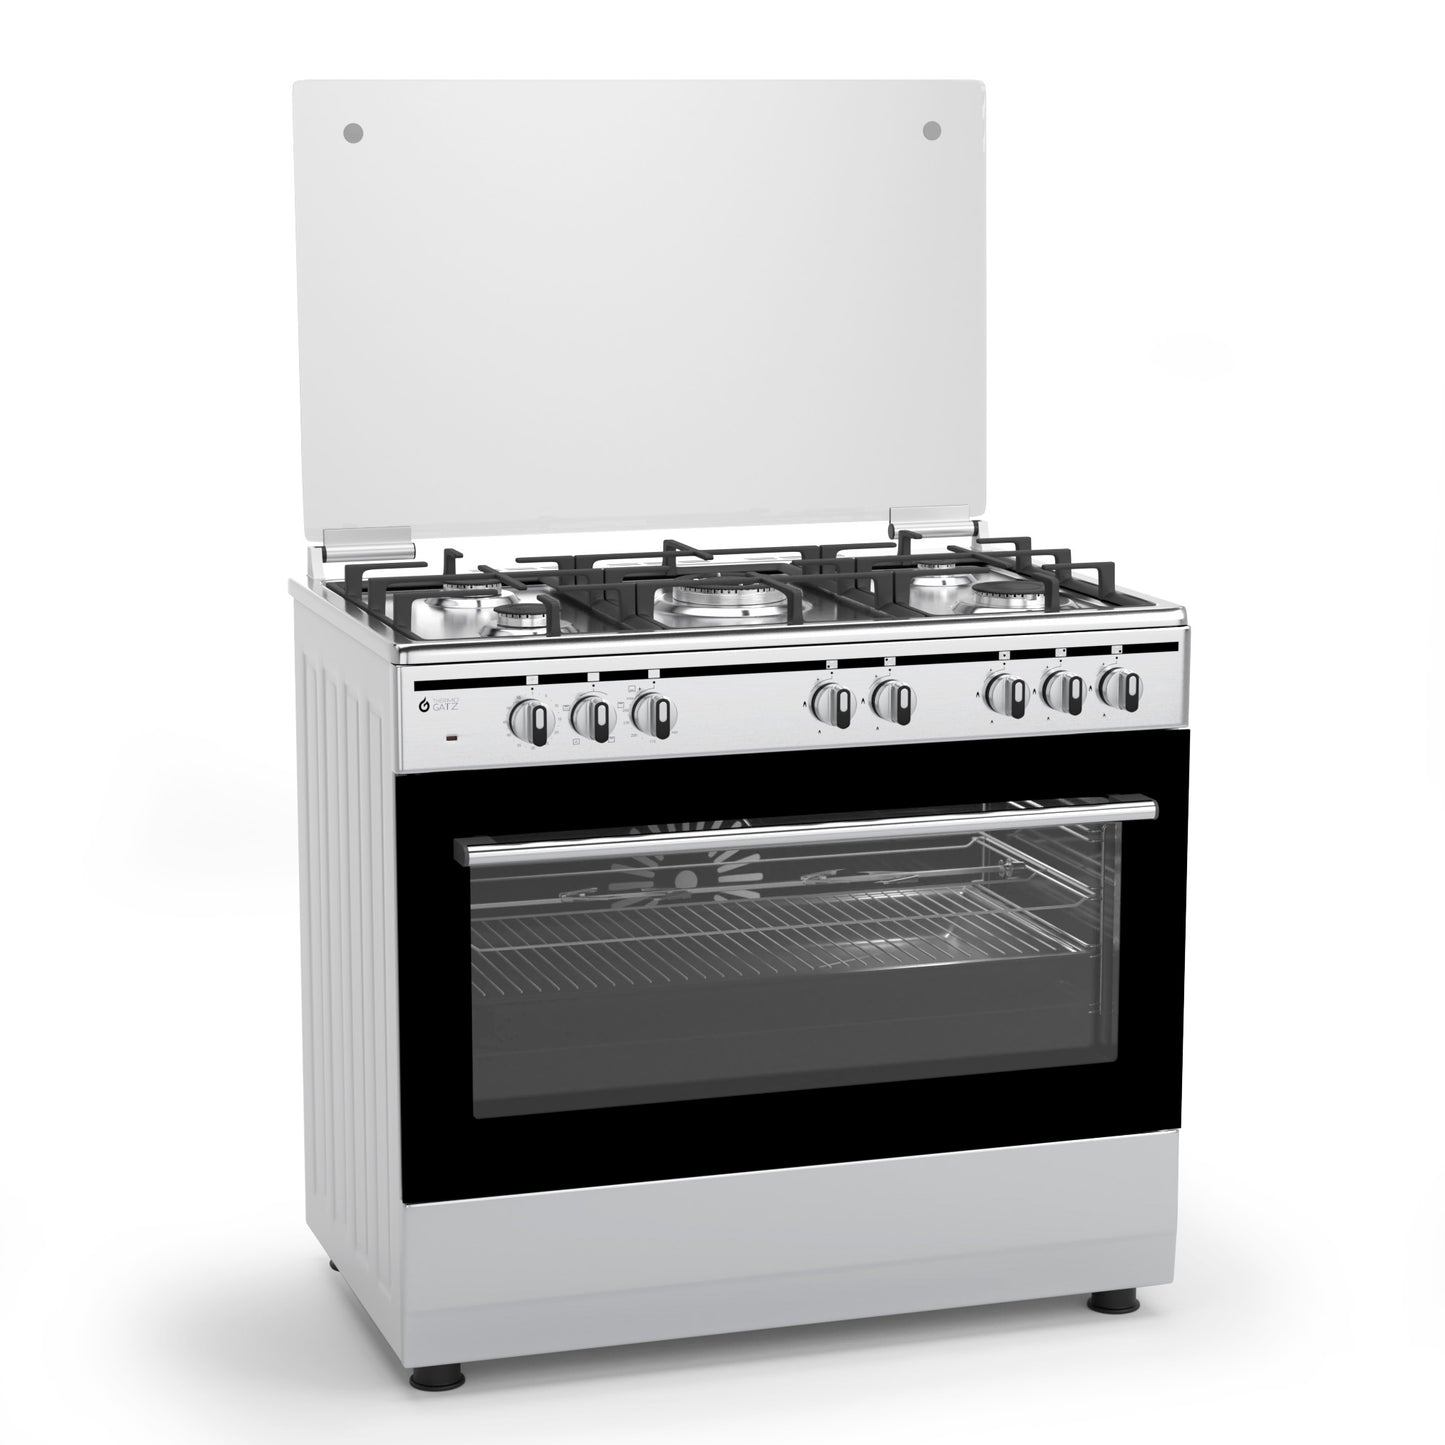 GAS OVEN WITH GAS RANGES TGS-7000